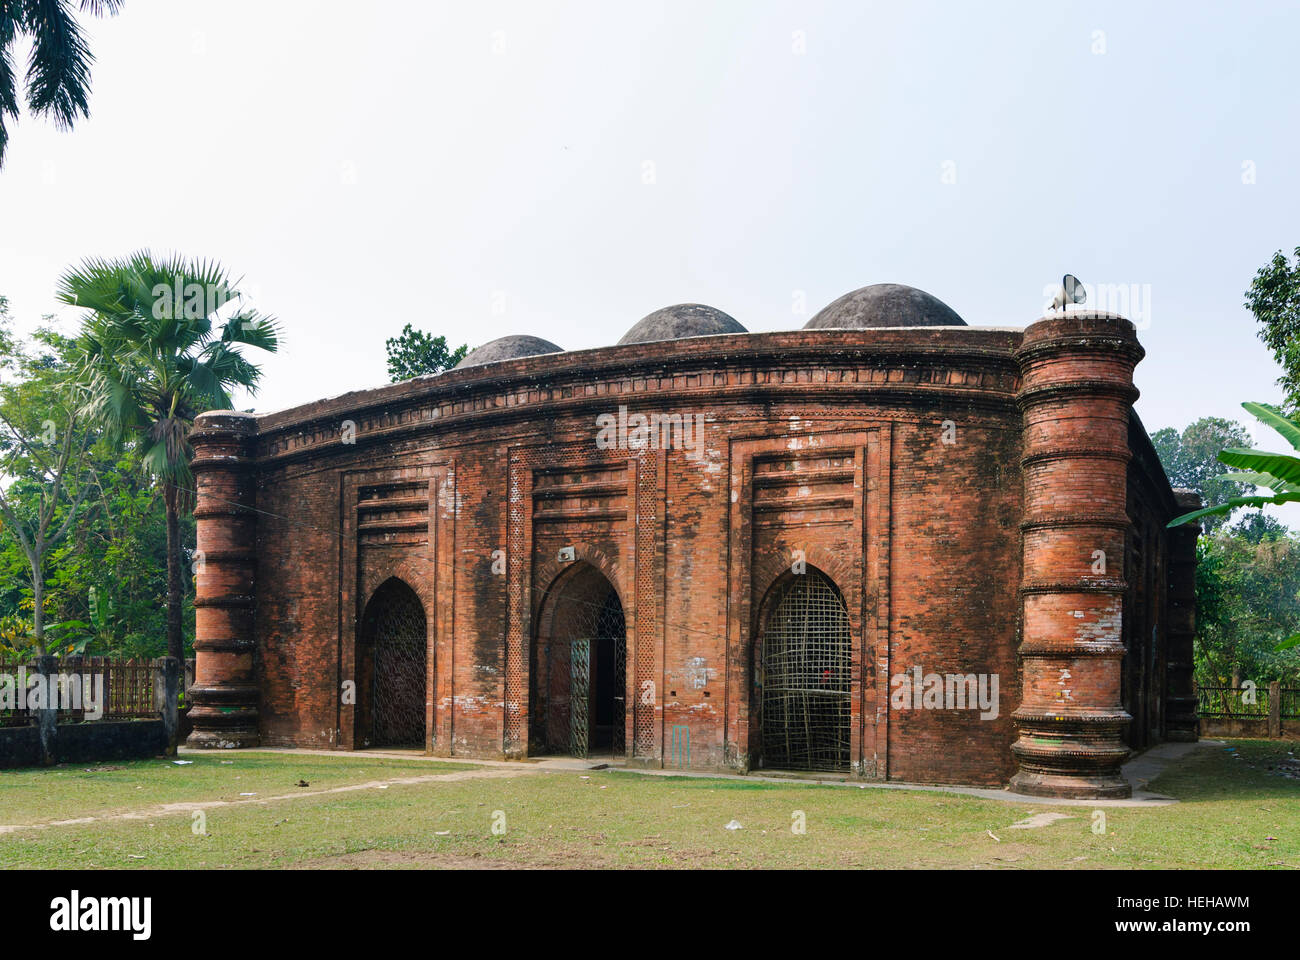 Bagerhat: Nine-domed mosque, Khulna Division, Bangladesh Stock Photo